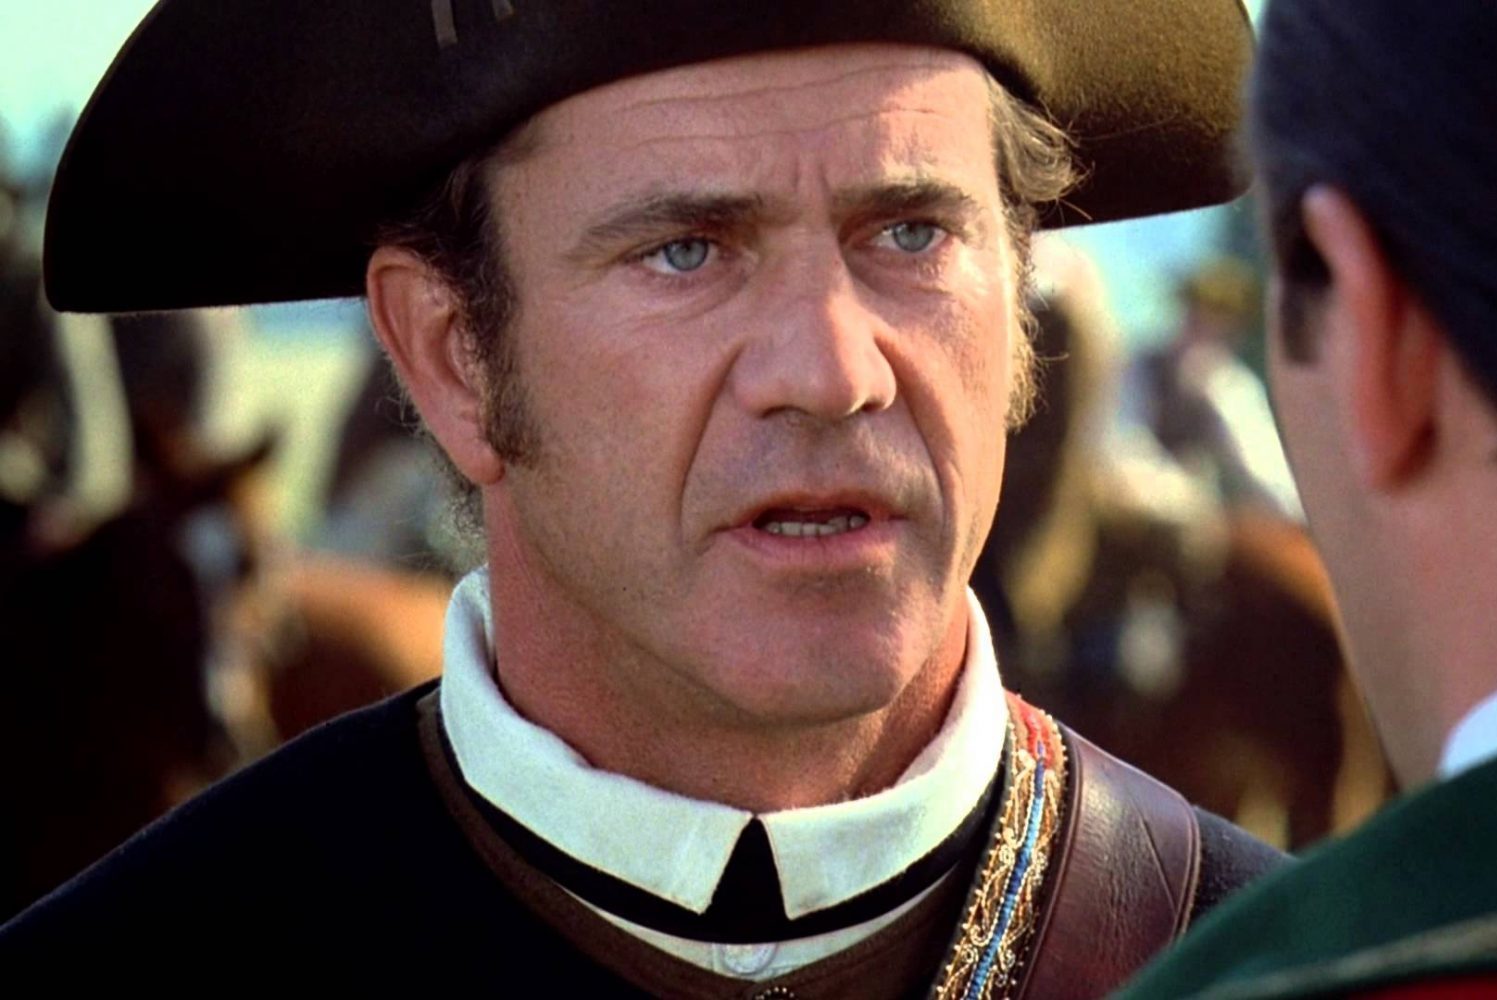 In article about historical drama, Mel Gibson in The Patriot